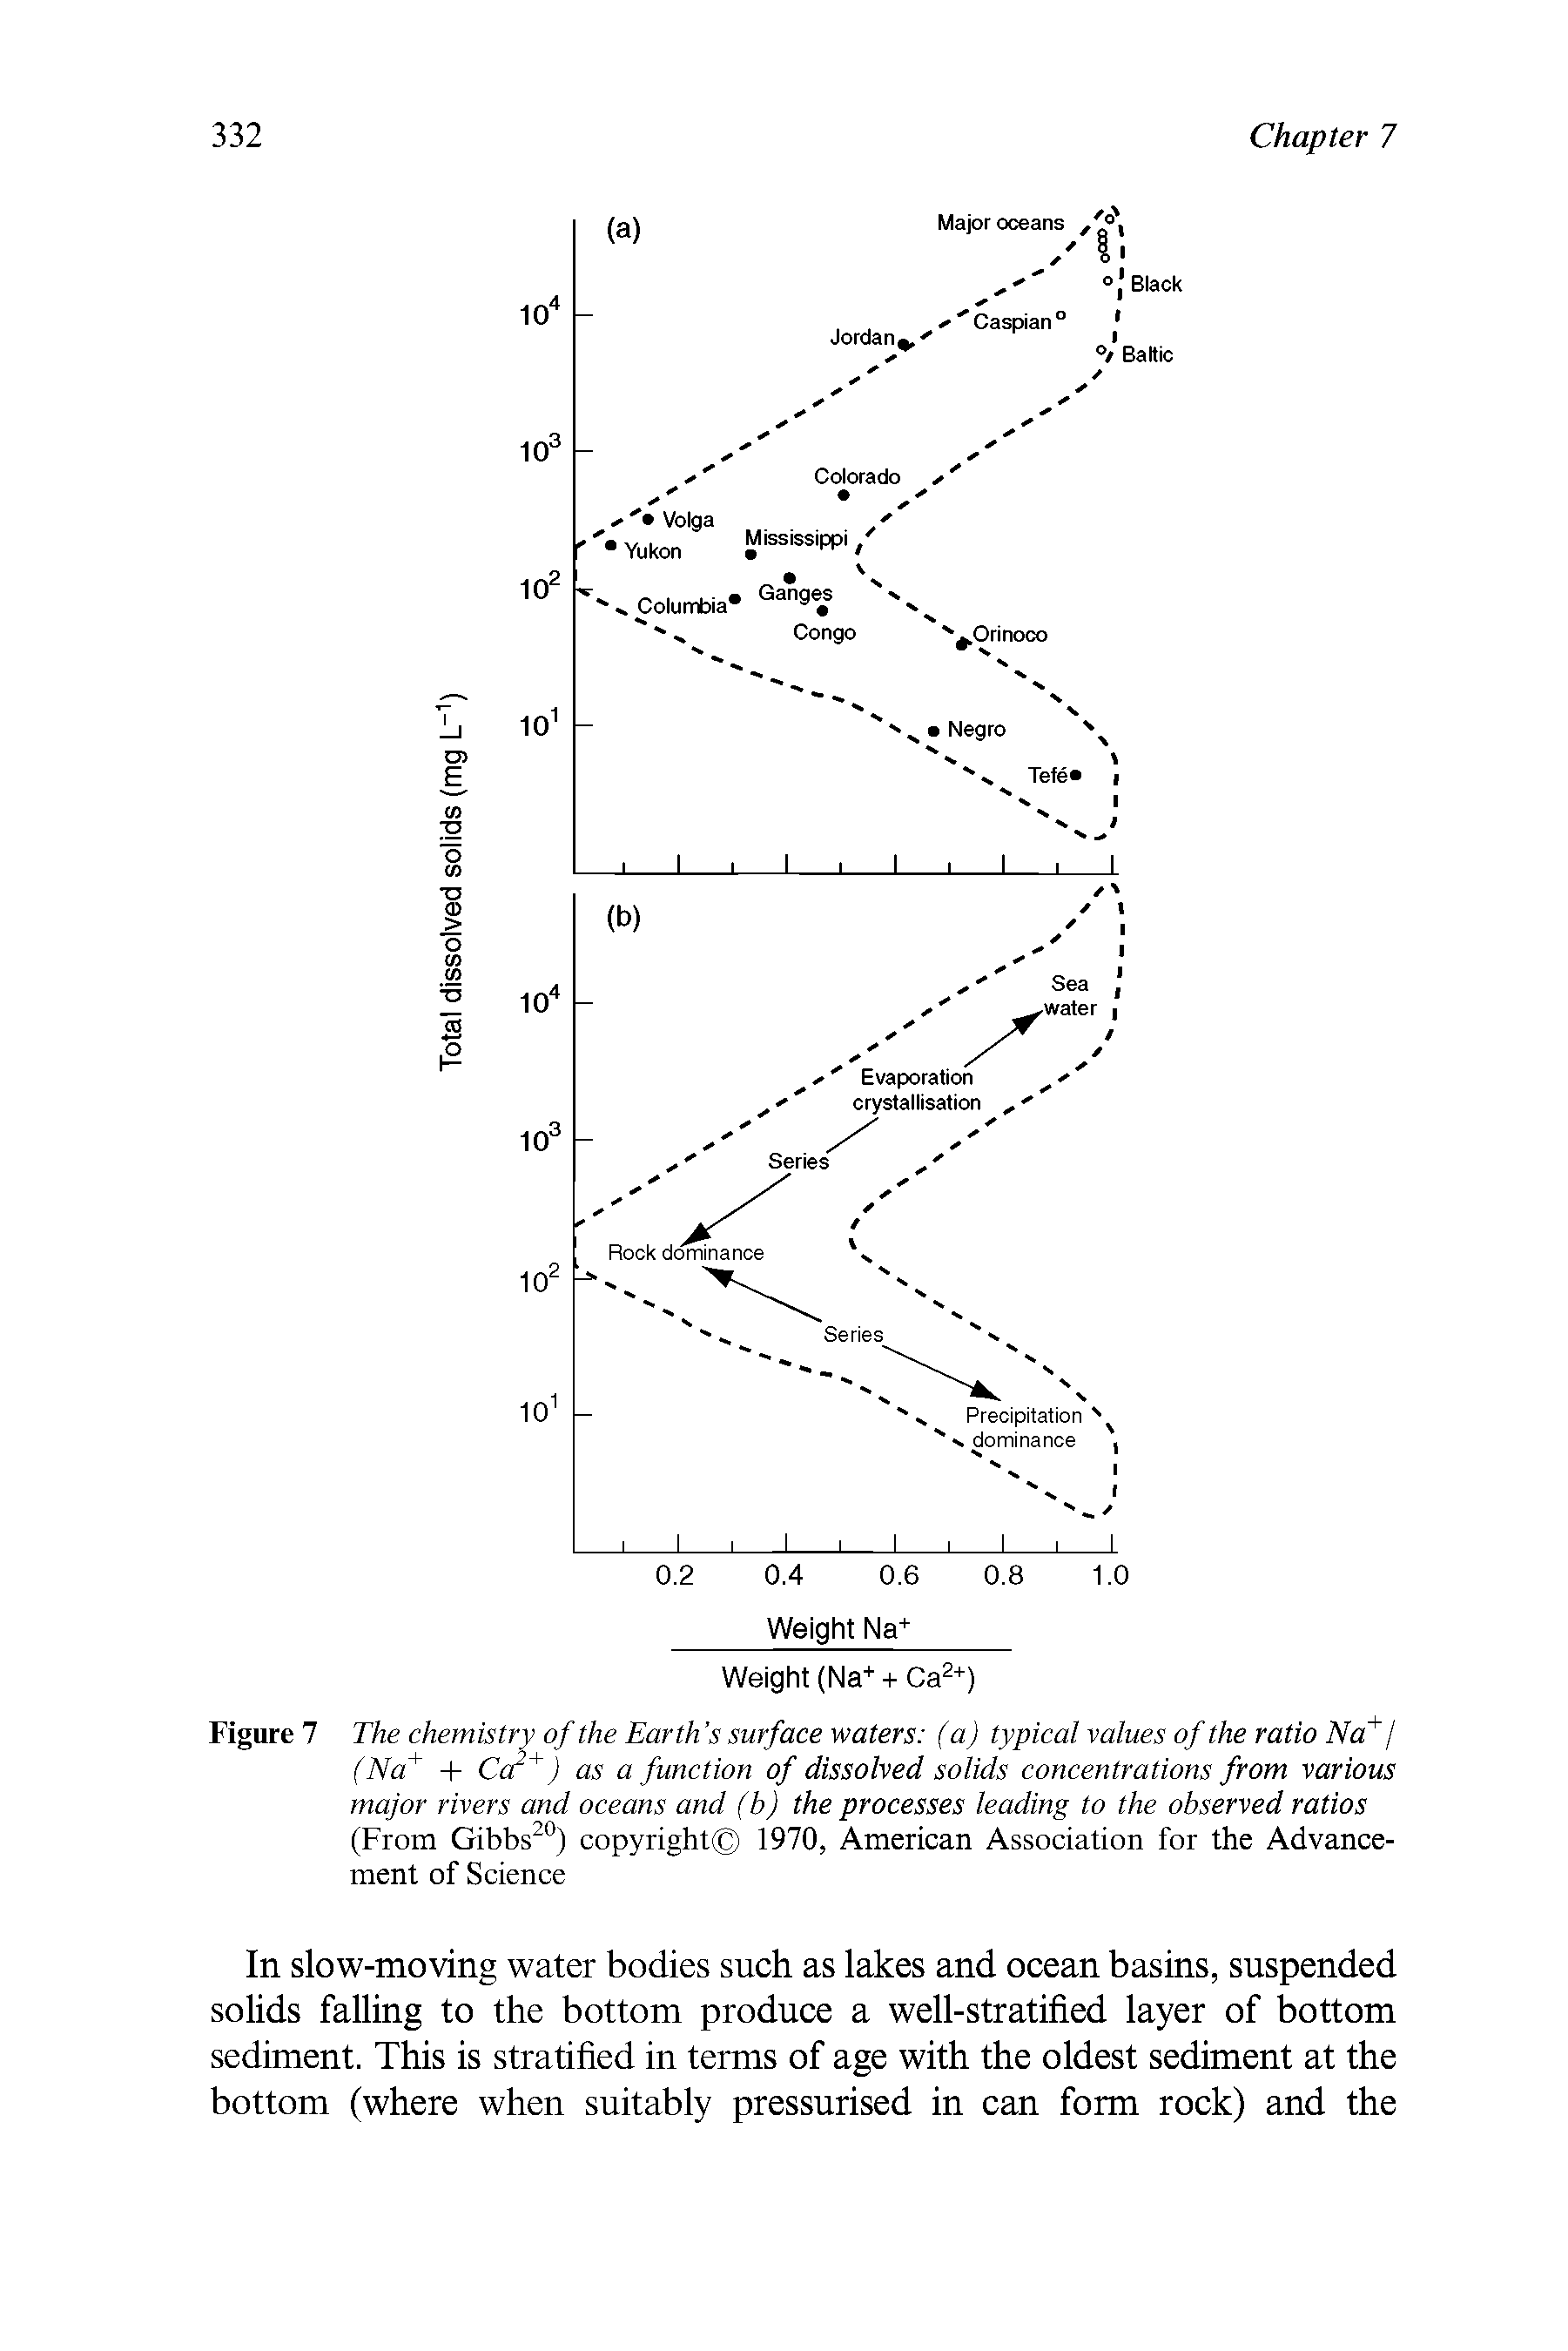 Figure 7 The chemistry of the Earth s surface waters (a) typical values of the ratio Na j (Na + Ca ) as a function of dissolved solids concentrations from various major rivers and oceans and (b) the processes leading to the observed ratios (From Gibbs ) copyright 1970, American Association for the Advancement of Science...